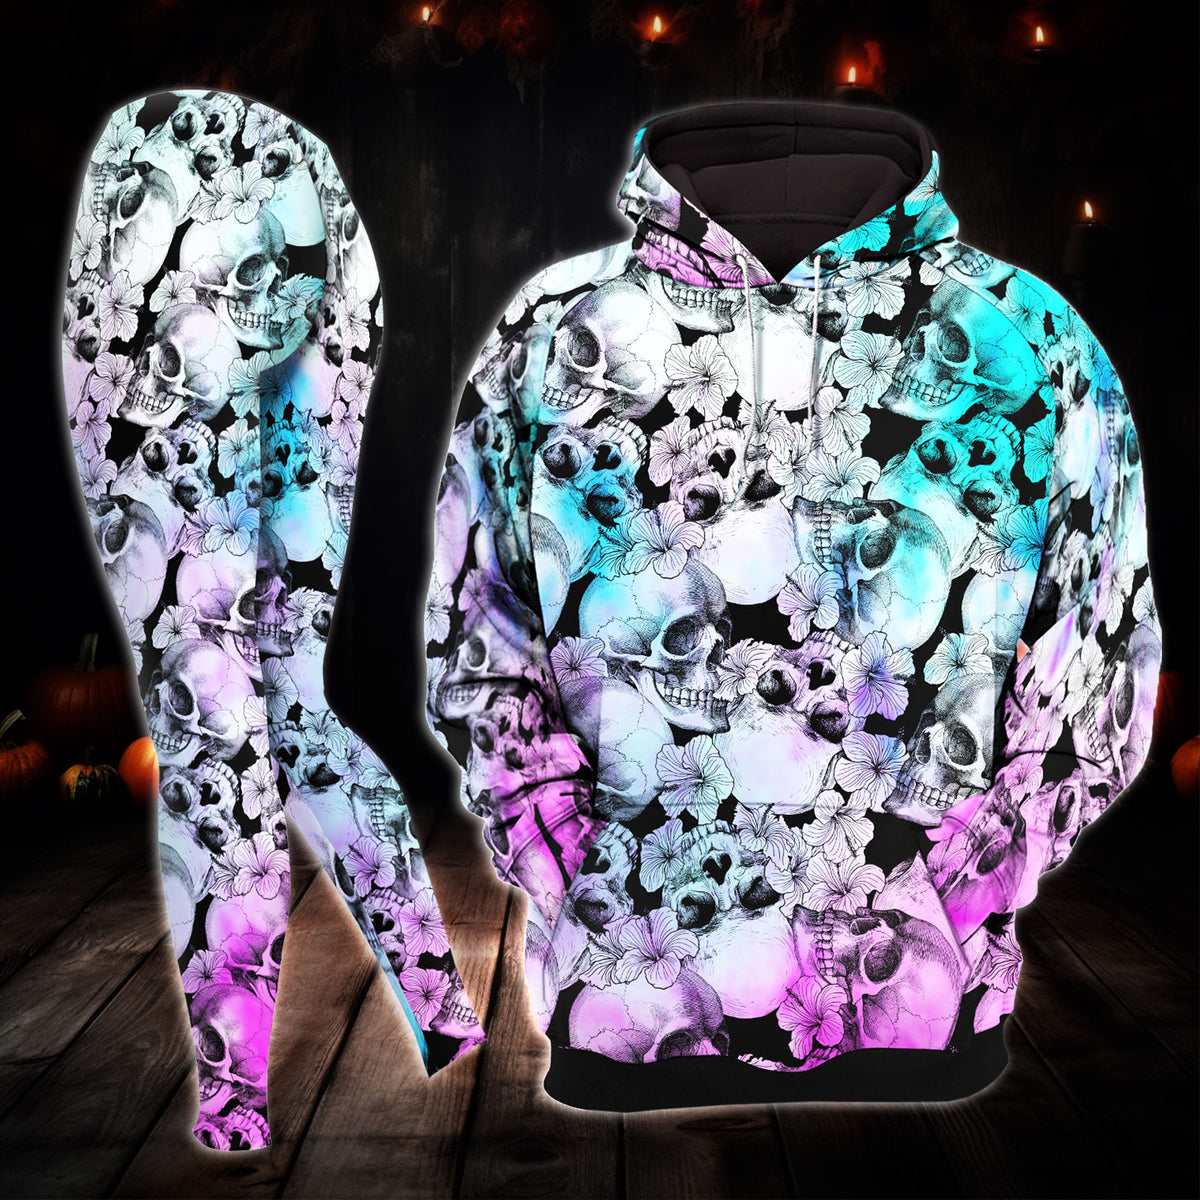 Blue Violet Gradient Skull Combo Hoodie and Leggings - Dark and edgy matching set with skull designs for a unique and stylish look.